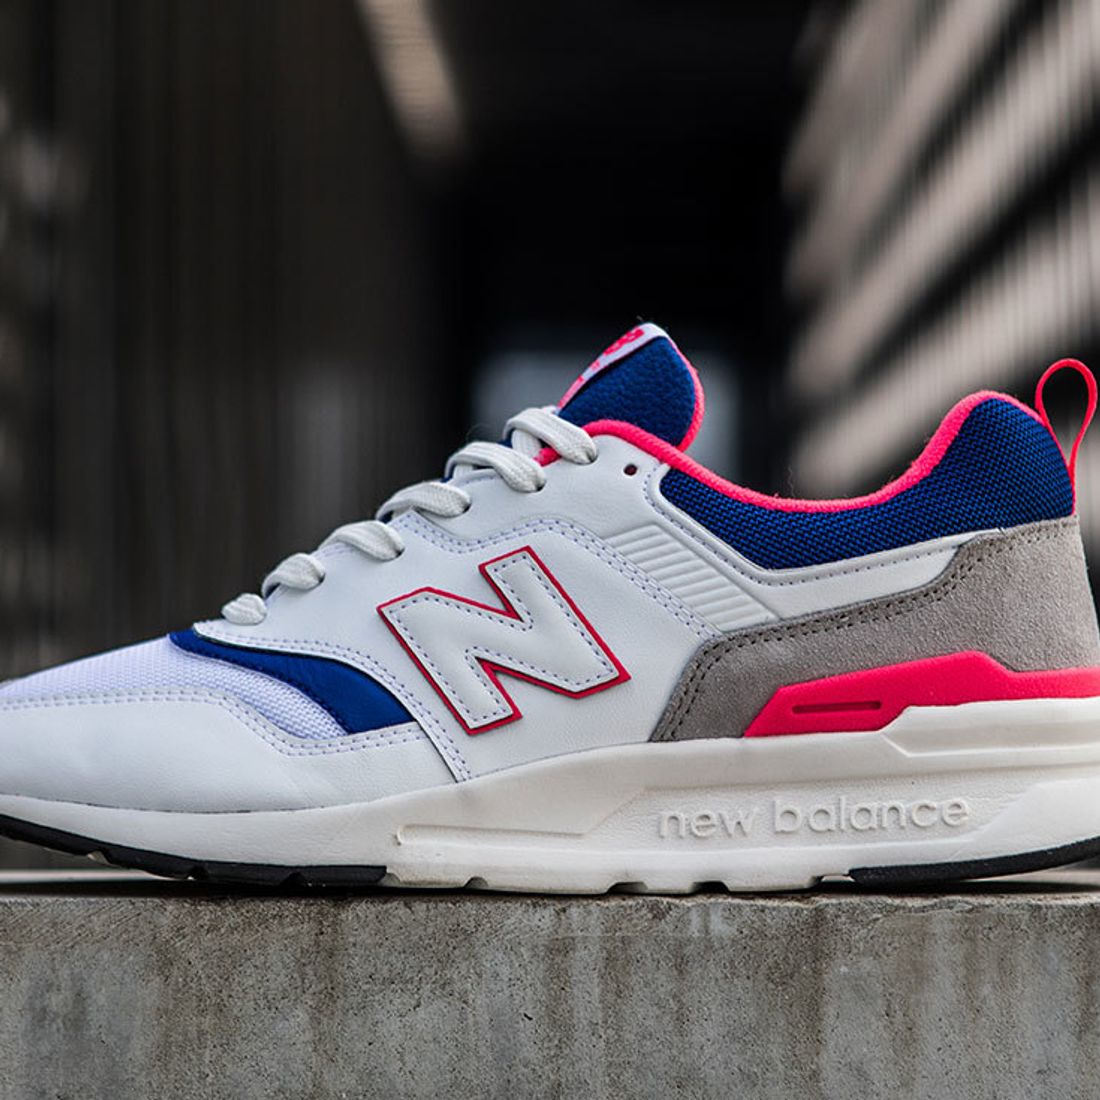 Hypothesis Confirmed: New Balance's 997H is Coming - Sneaker